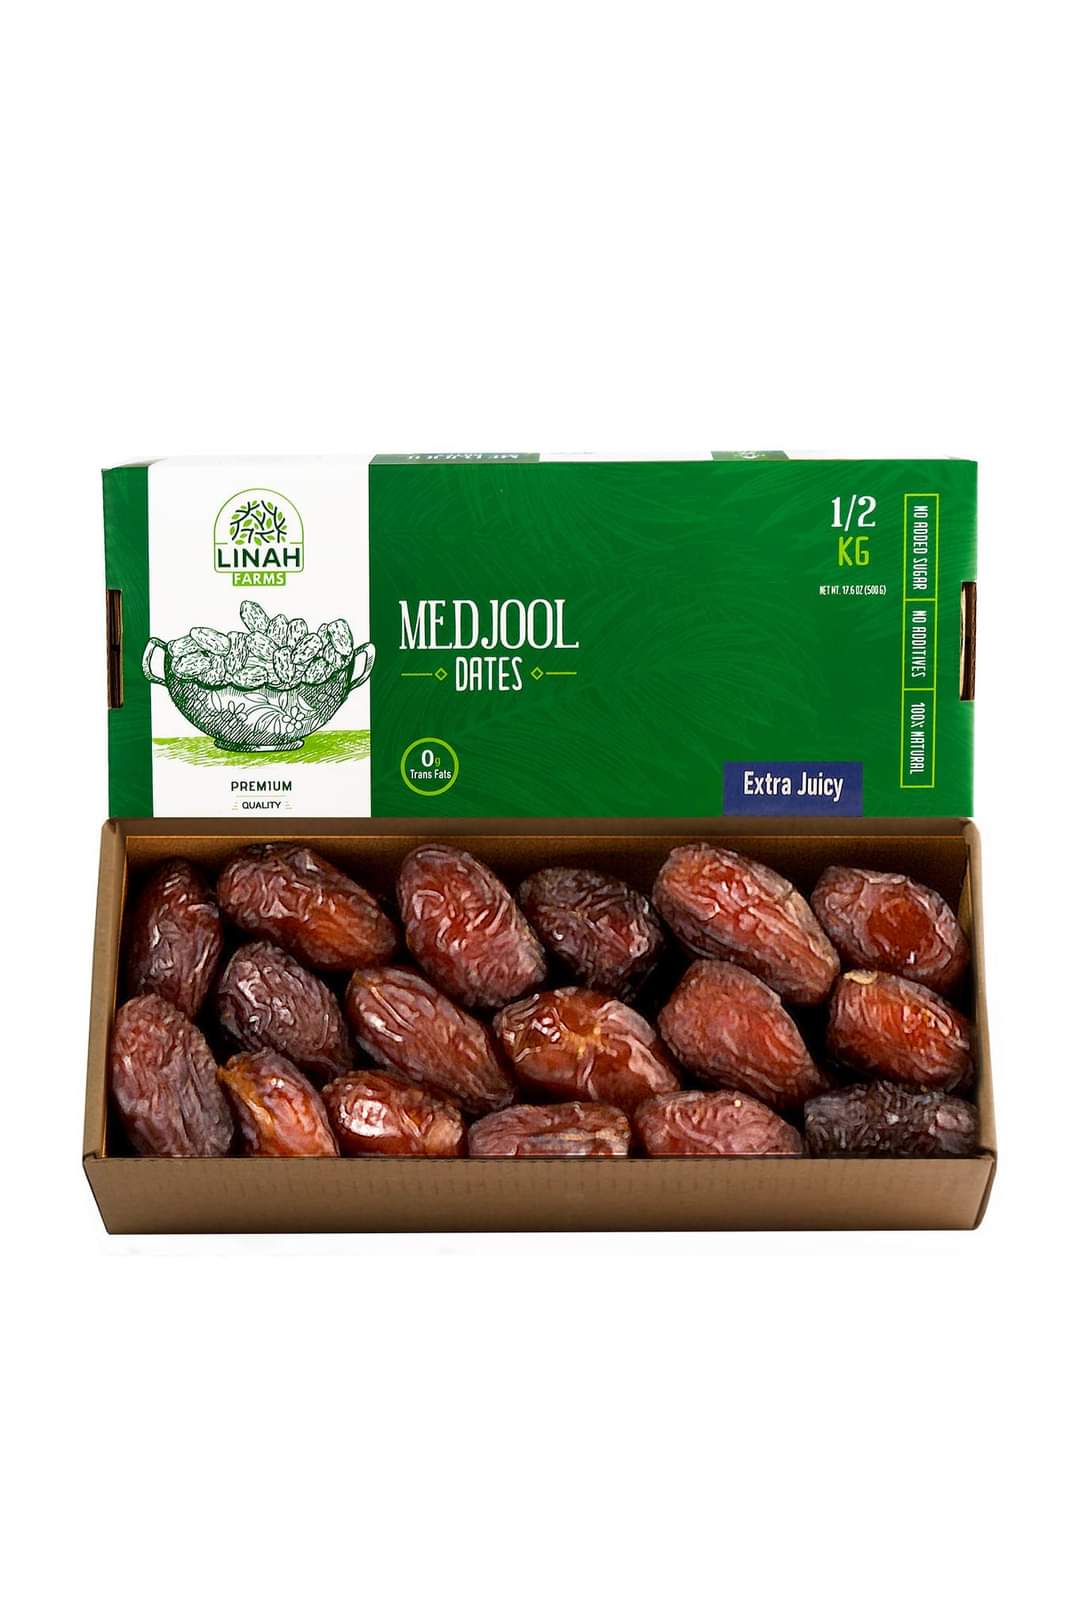 0.5kg box of Linah Farms Extra Juicy Medjools with open box displaying the dates.